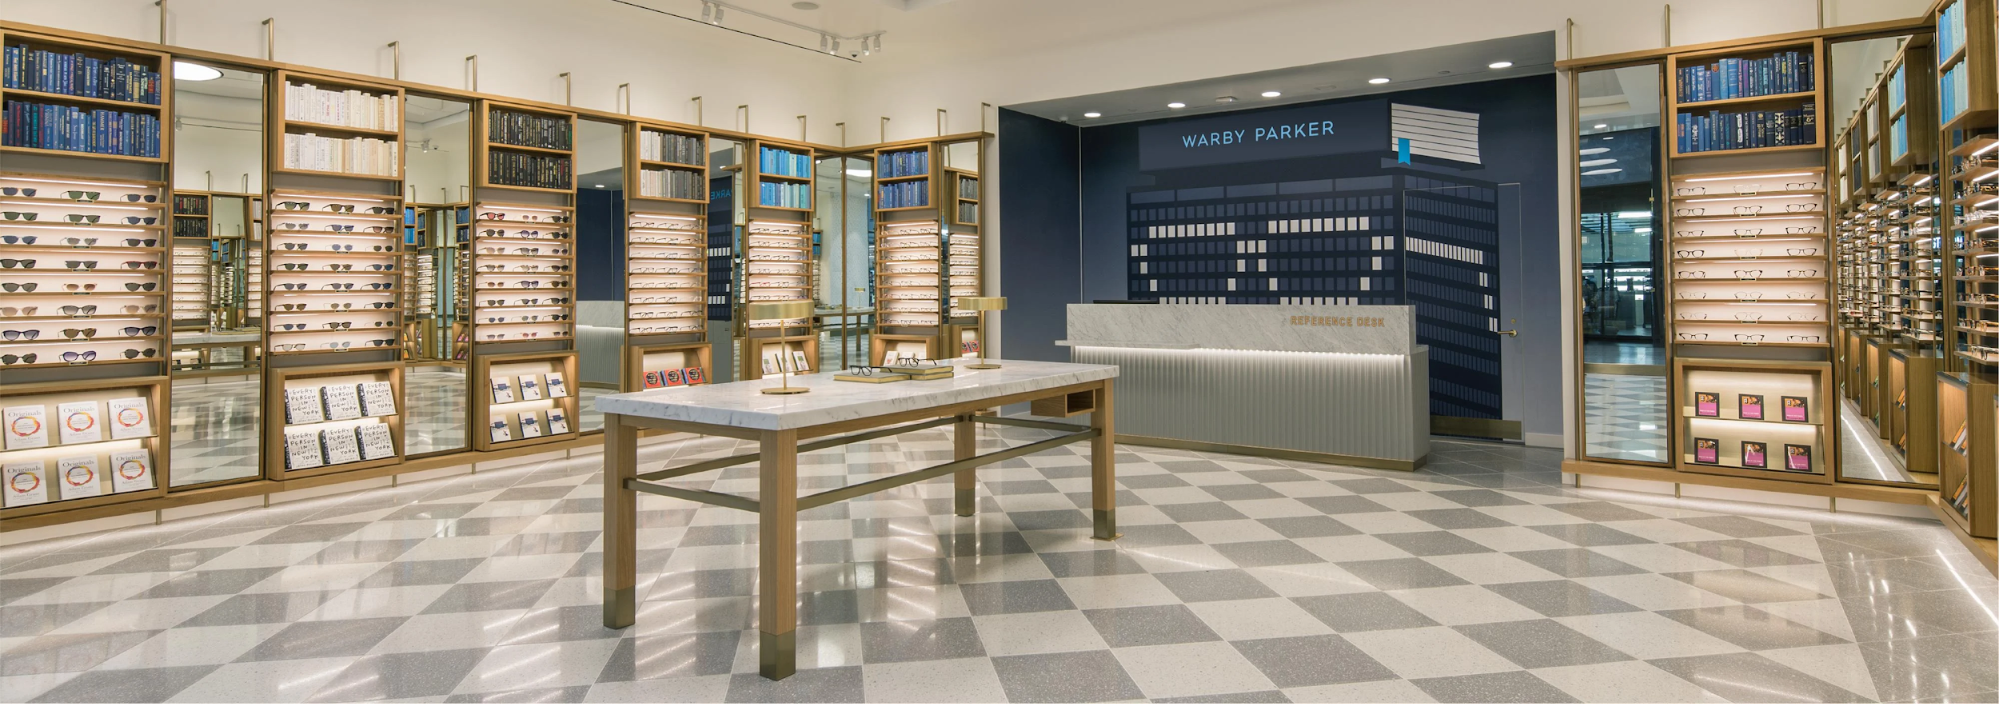 Warby Parker is bringing back furloughed staff as it reopens more stores